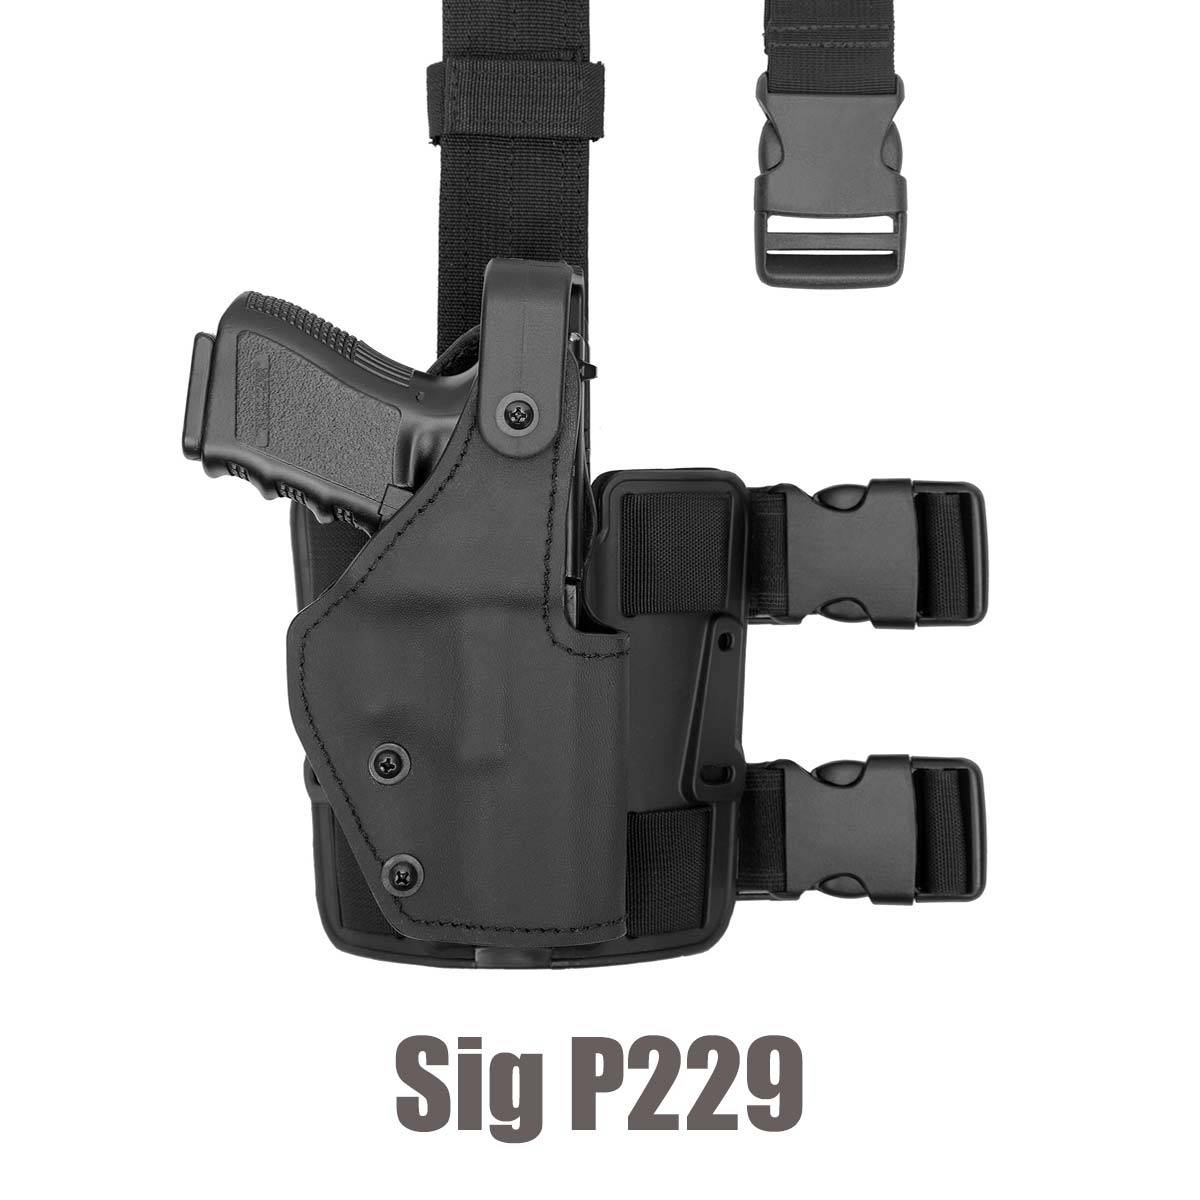 Holster Swiss-Arms Sig P220 P226 P228 P229 - Armurerie Centrale